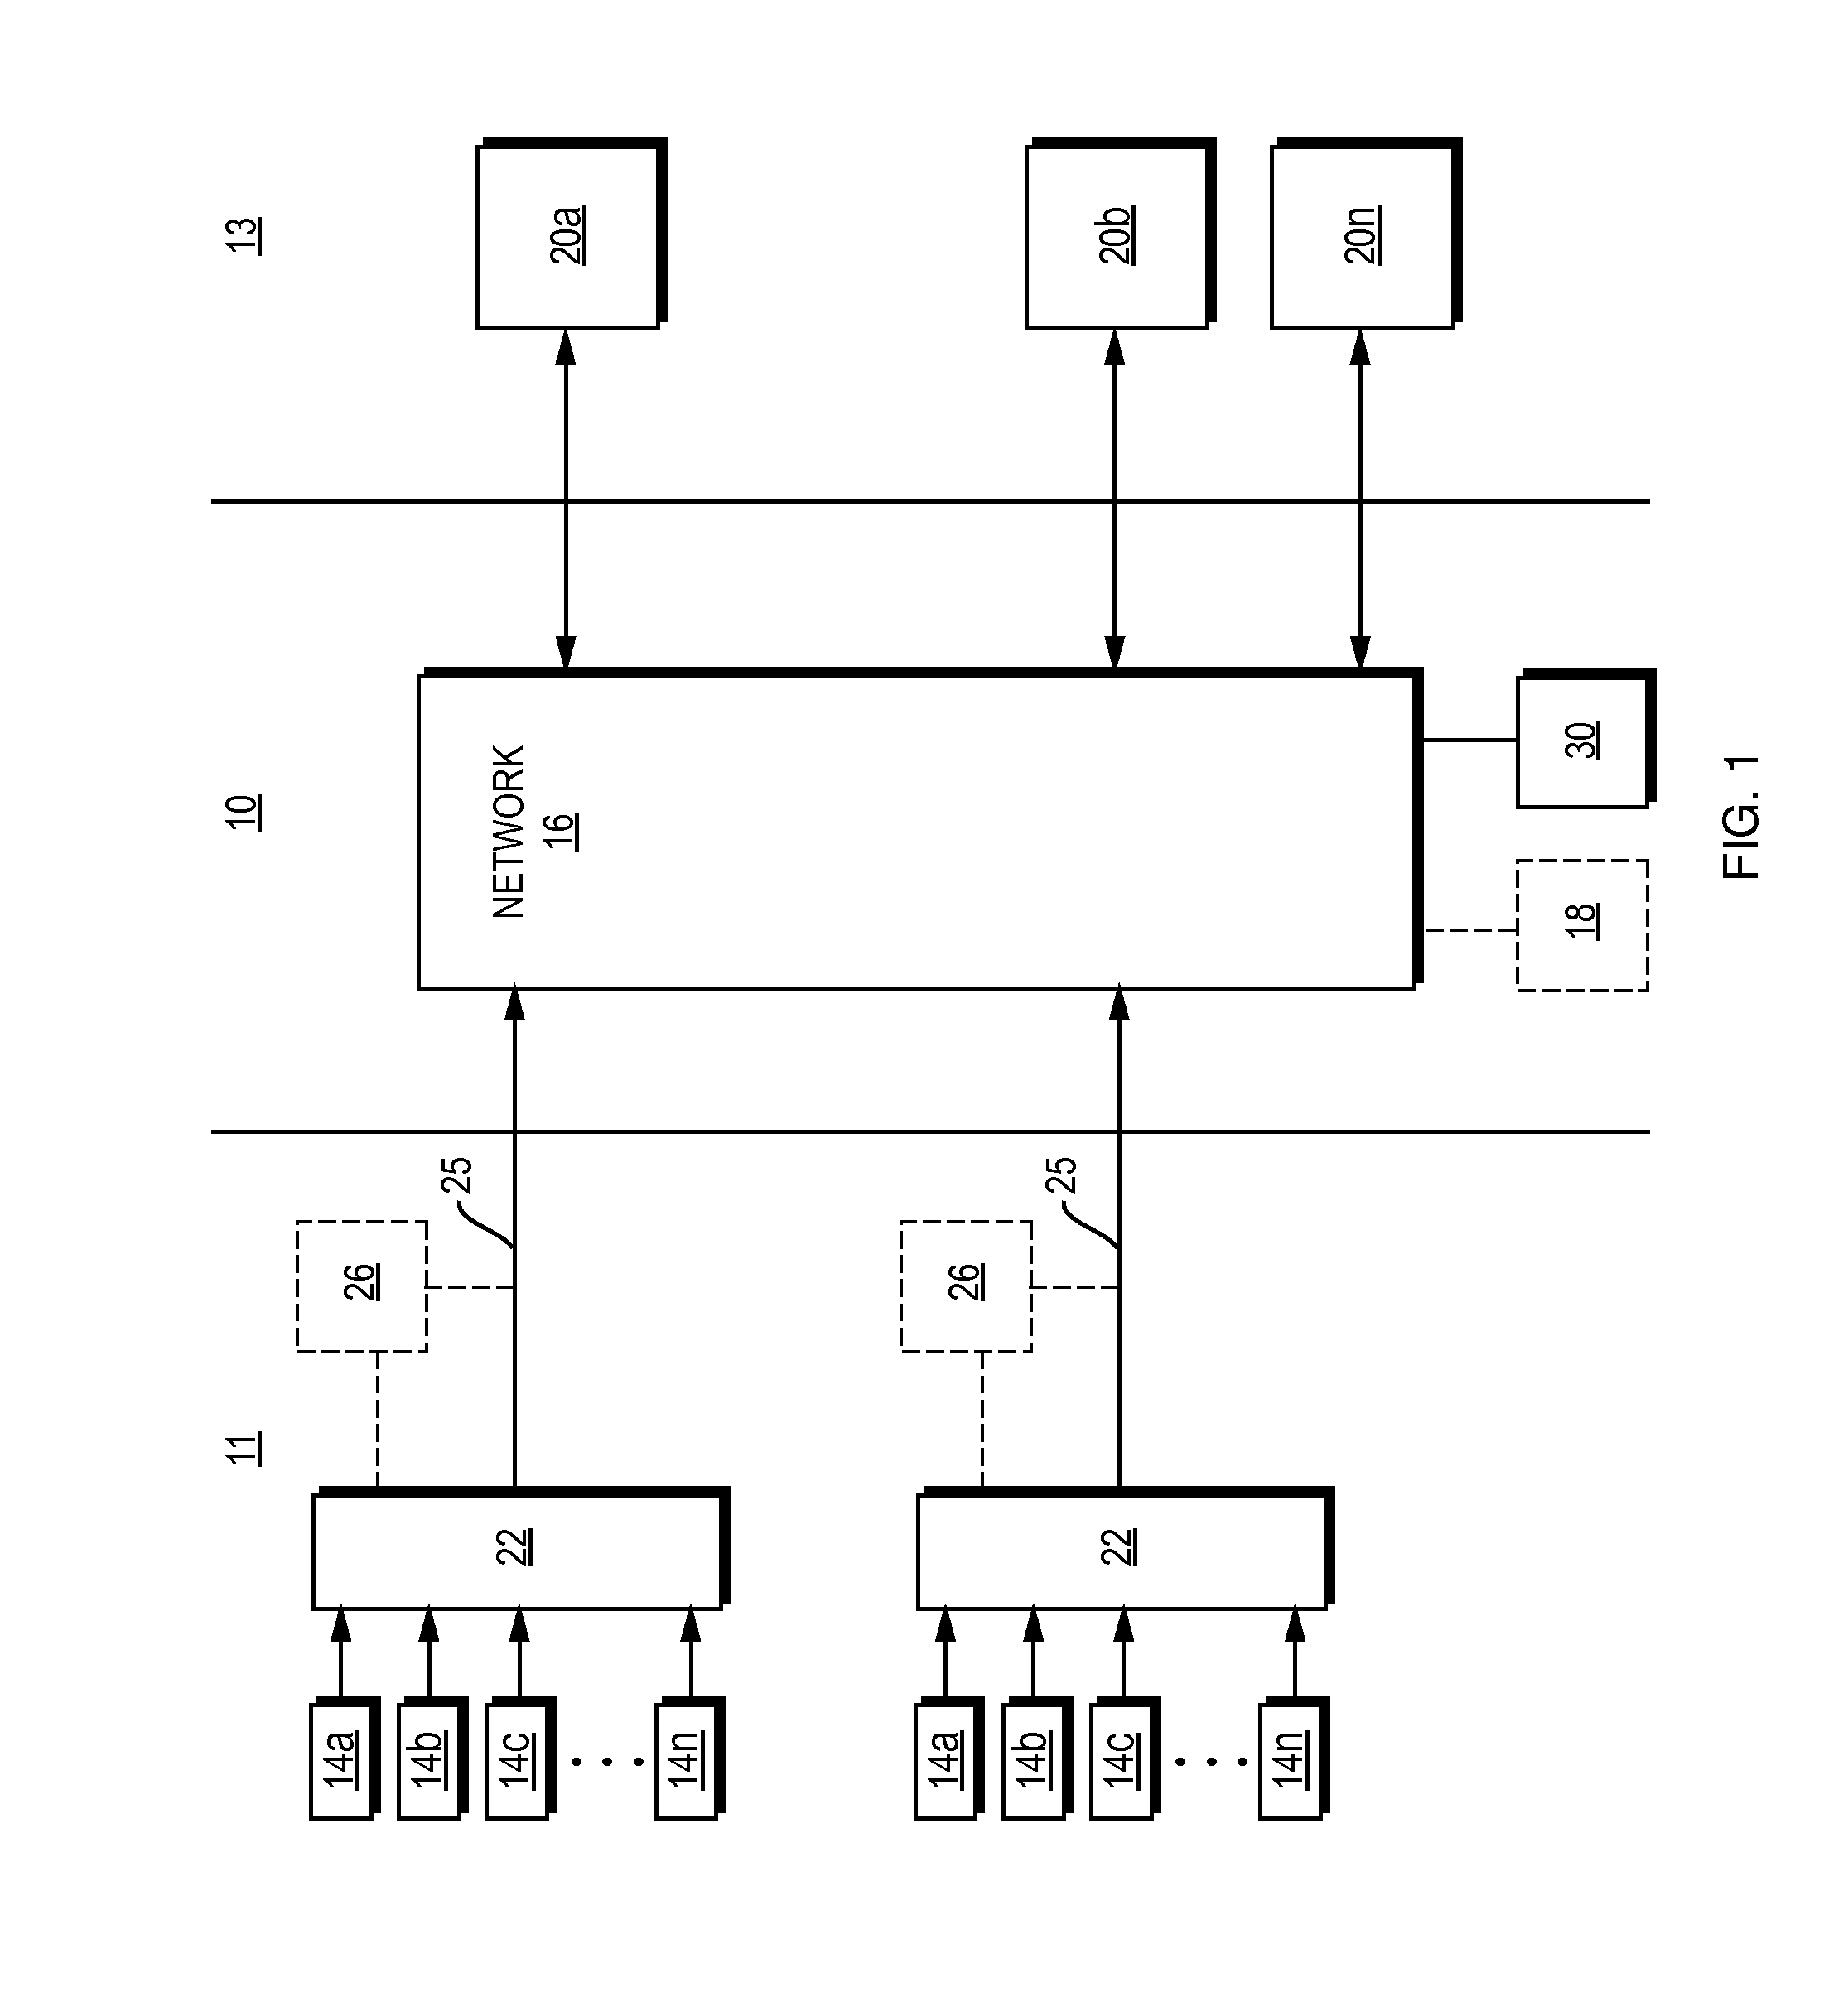 Remote healthcare data-gathering and viewing system and method